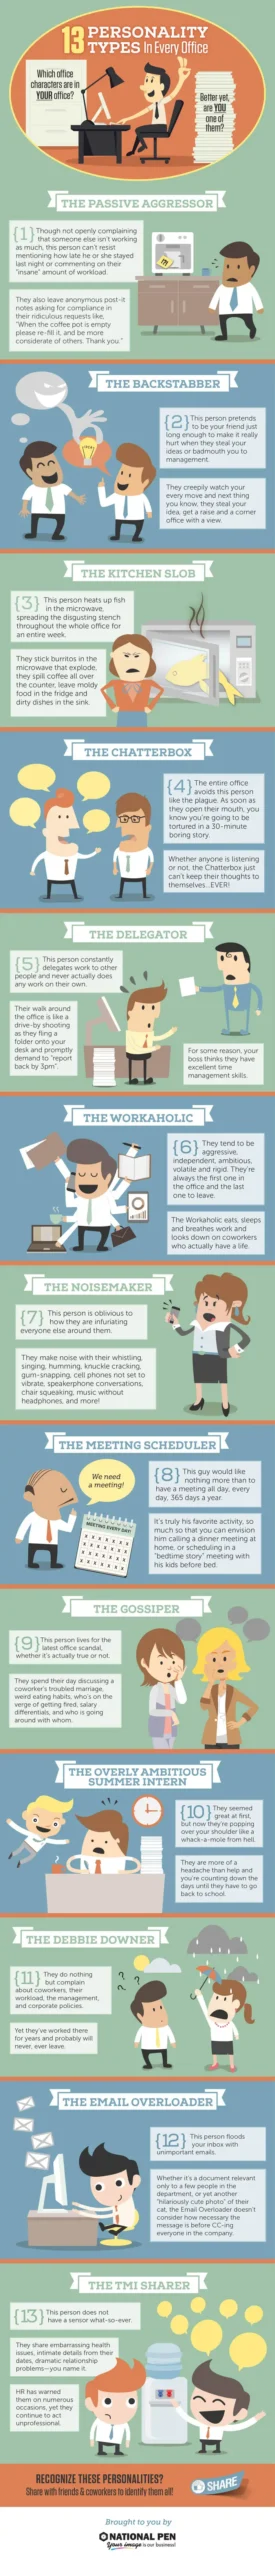 13 Personality Types In Every Office [InfoGraphic]
